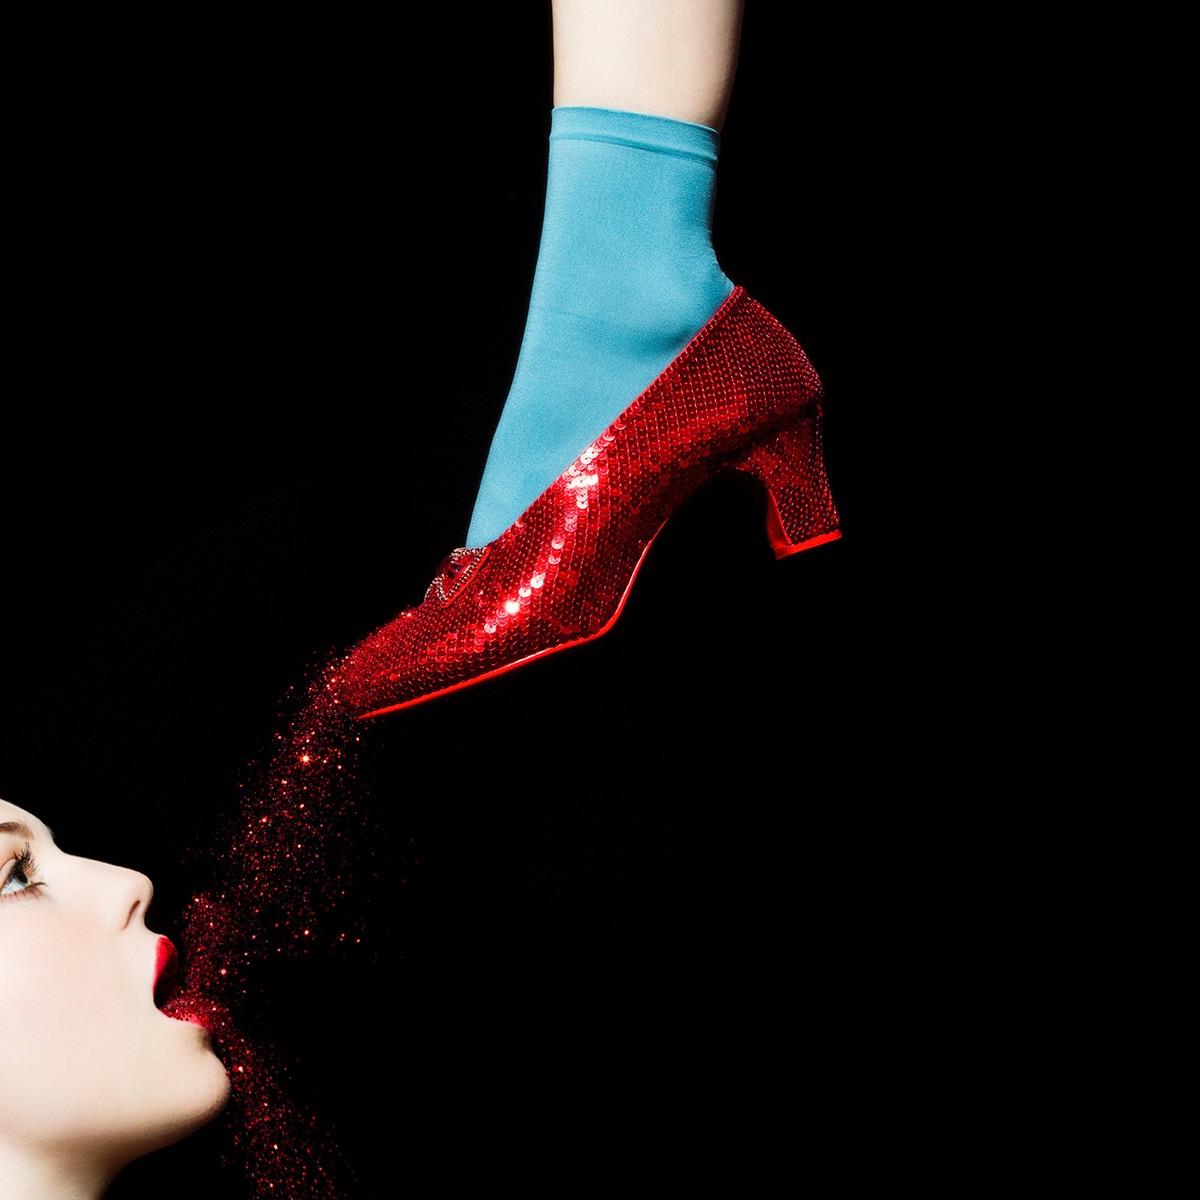 Tyler Shields - Ruby Slippers, Photography 2019, Printed After